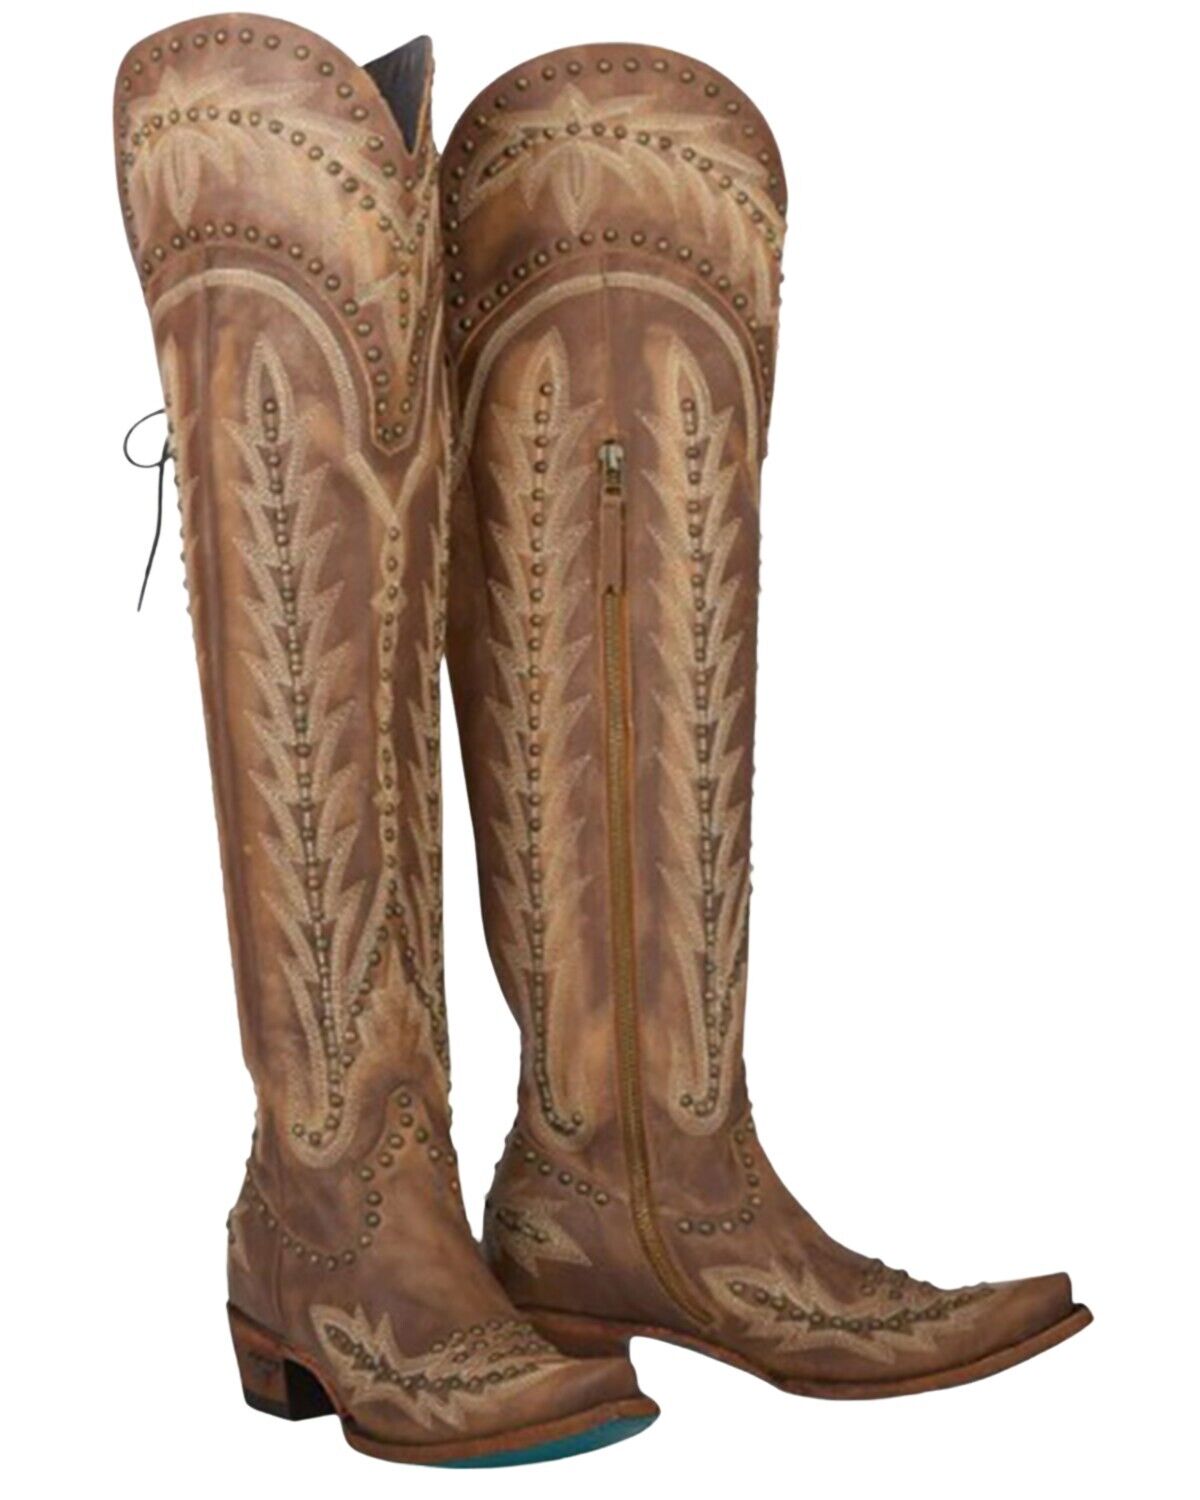 Lexington Over the Knee Boot  Snip Toe Women's Red Cowboy Boots